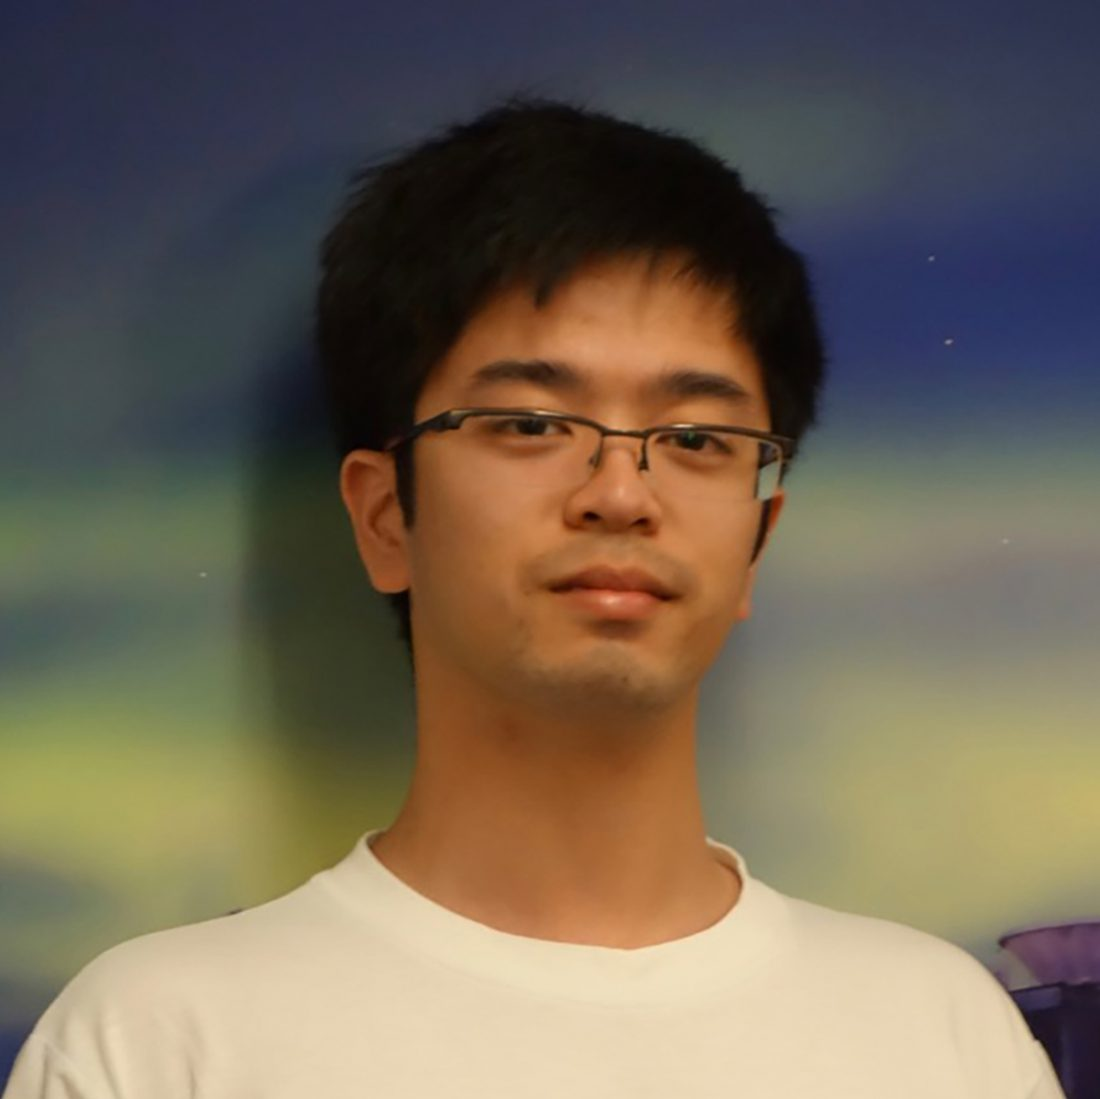 An Asian man with black hair and thin wire glasses, wearing a white tshirt and standing in front of a photo of an aurora.